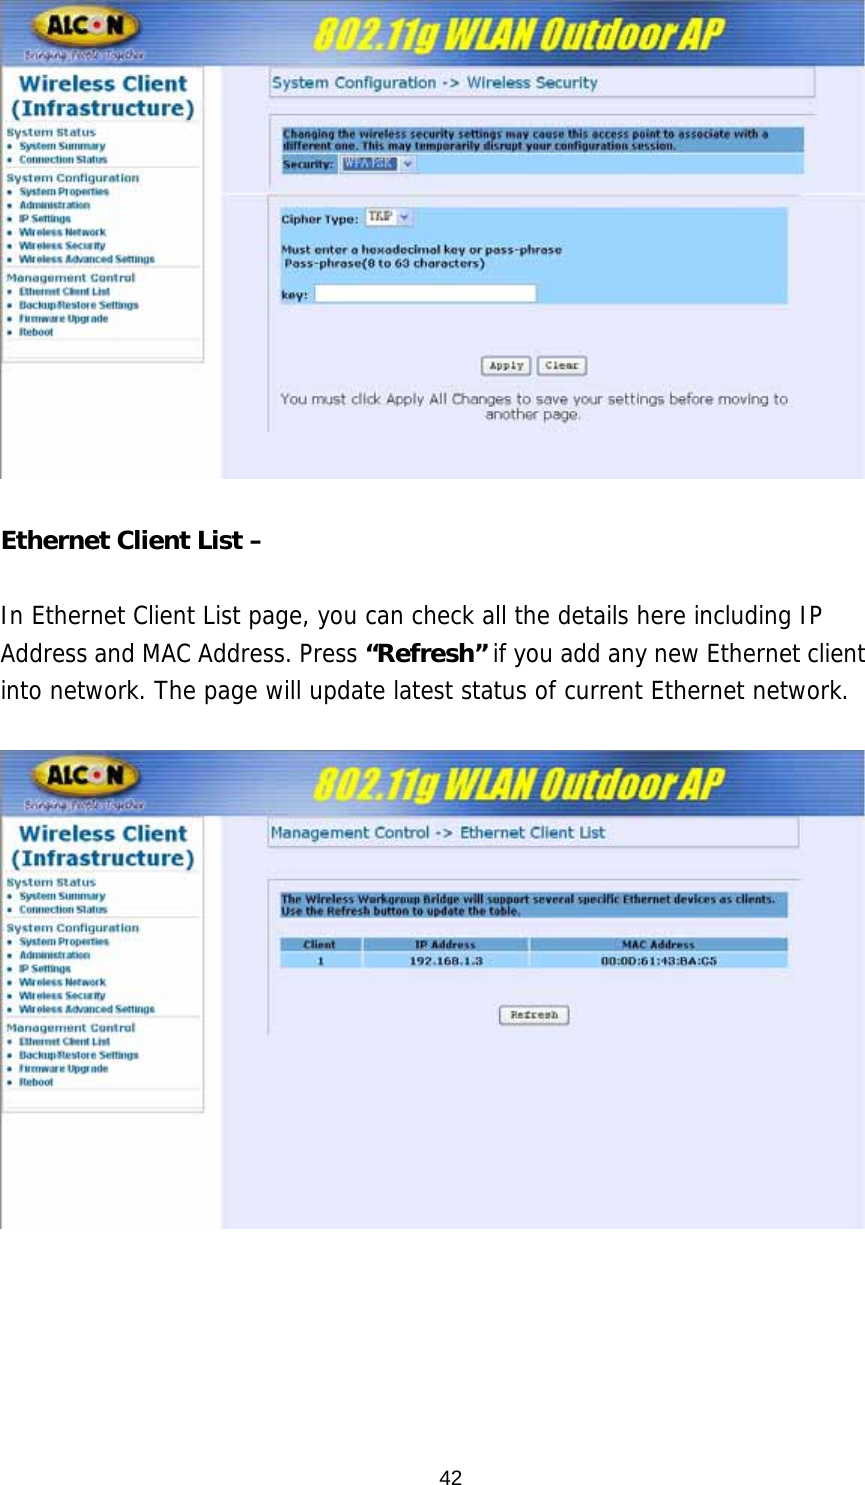   Ethernet Client List –  In Ethernet Client List page, you can check all the details here including IP Address and MAC Address. Press “Refresh” if you add any new Ethernet client into network. The page will update latest status of current Ethernet network.           42